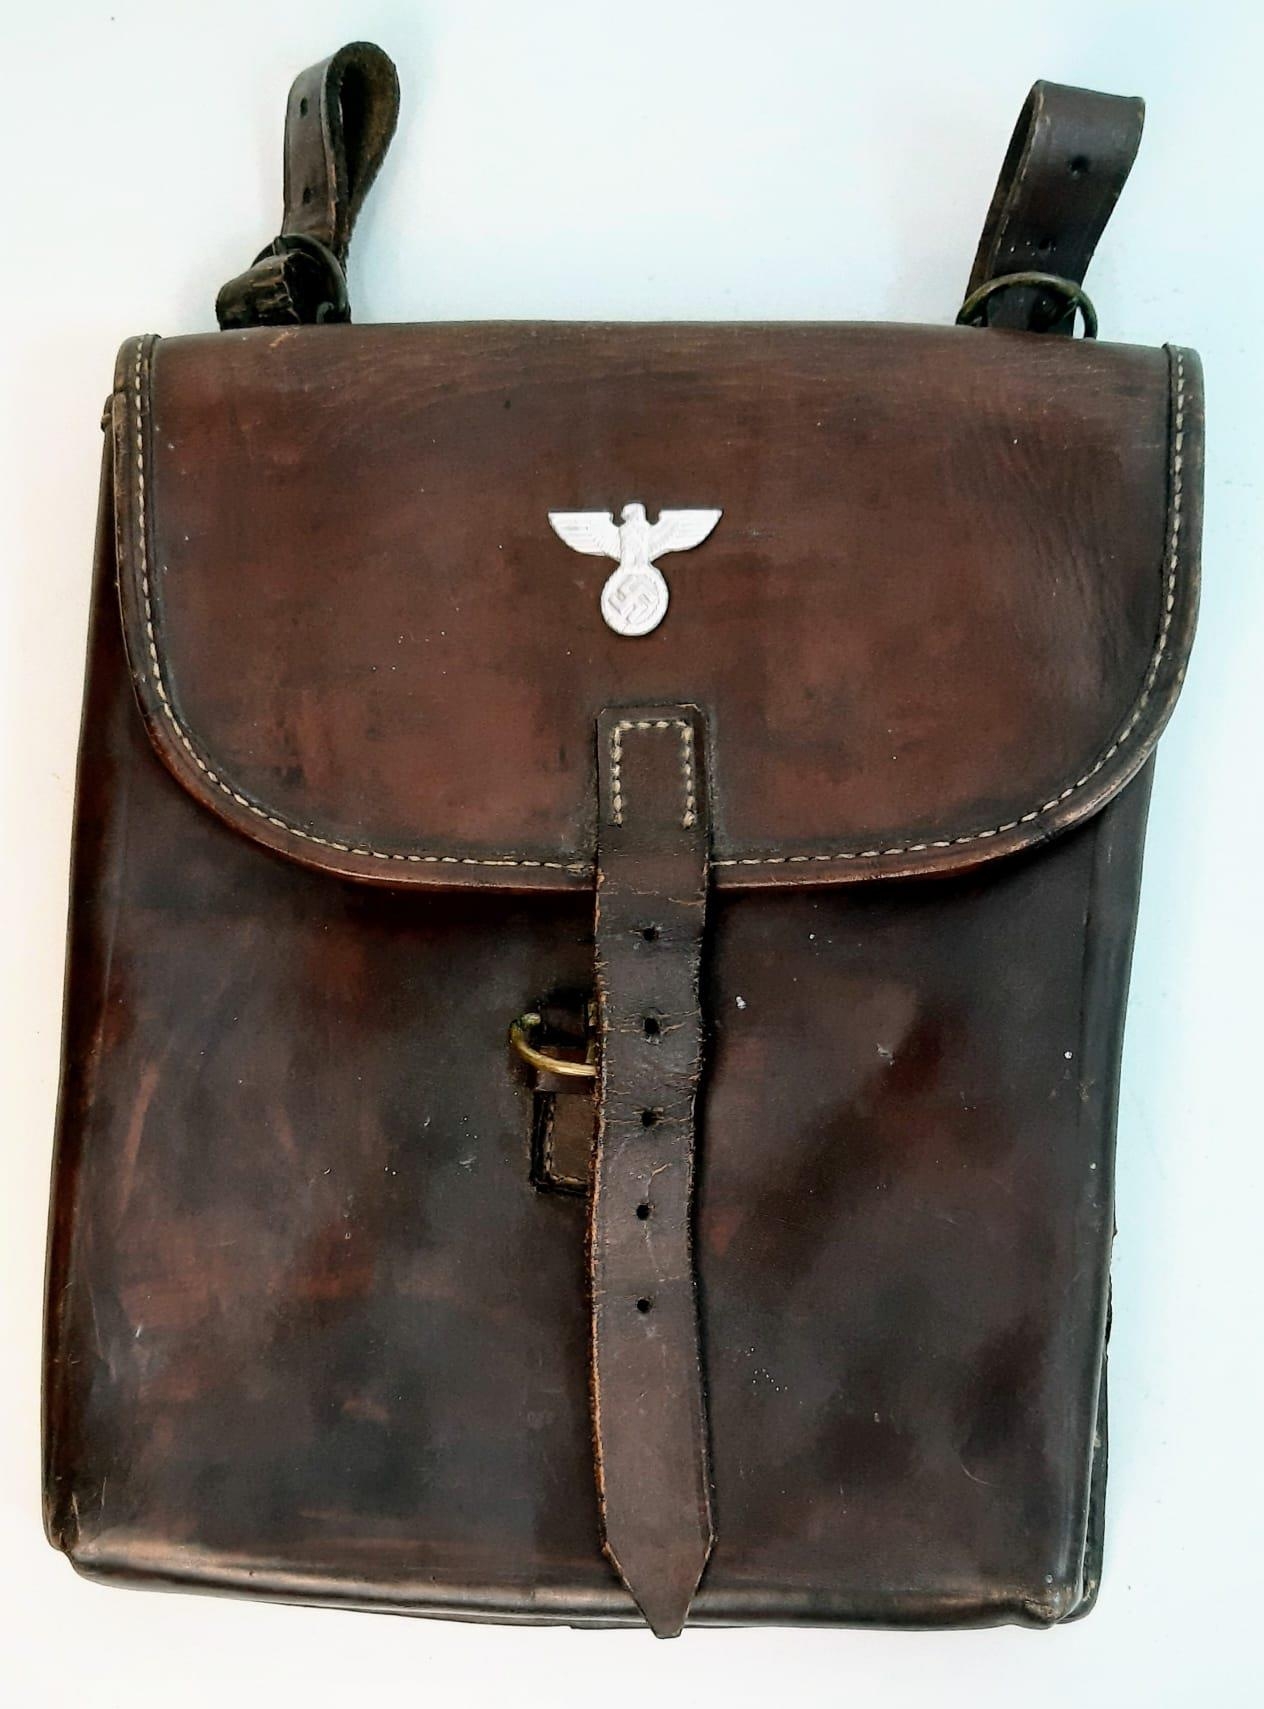 WW2 German Dispatch Riders Leather Document Pouch. An eagle badge has been added